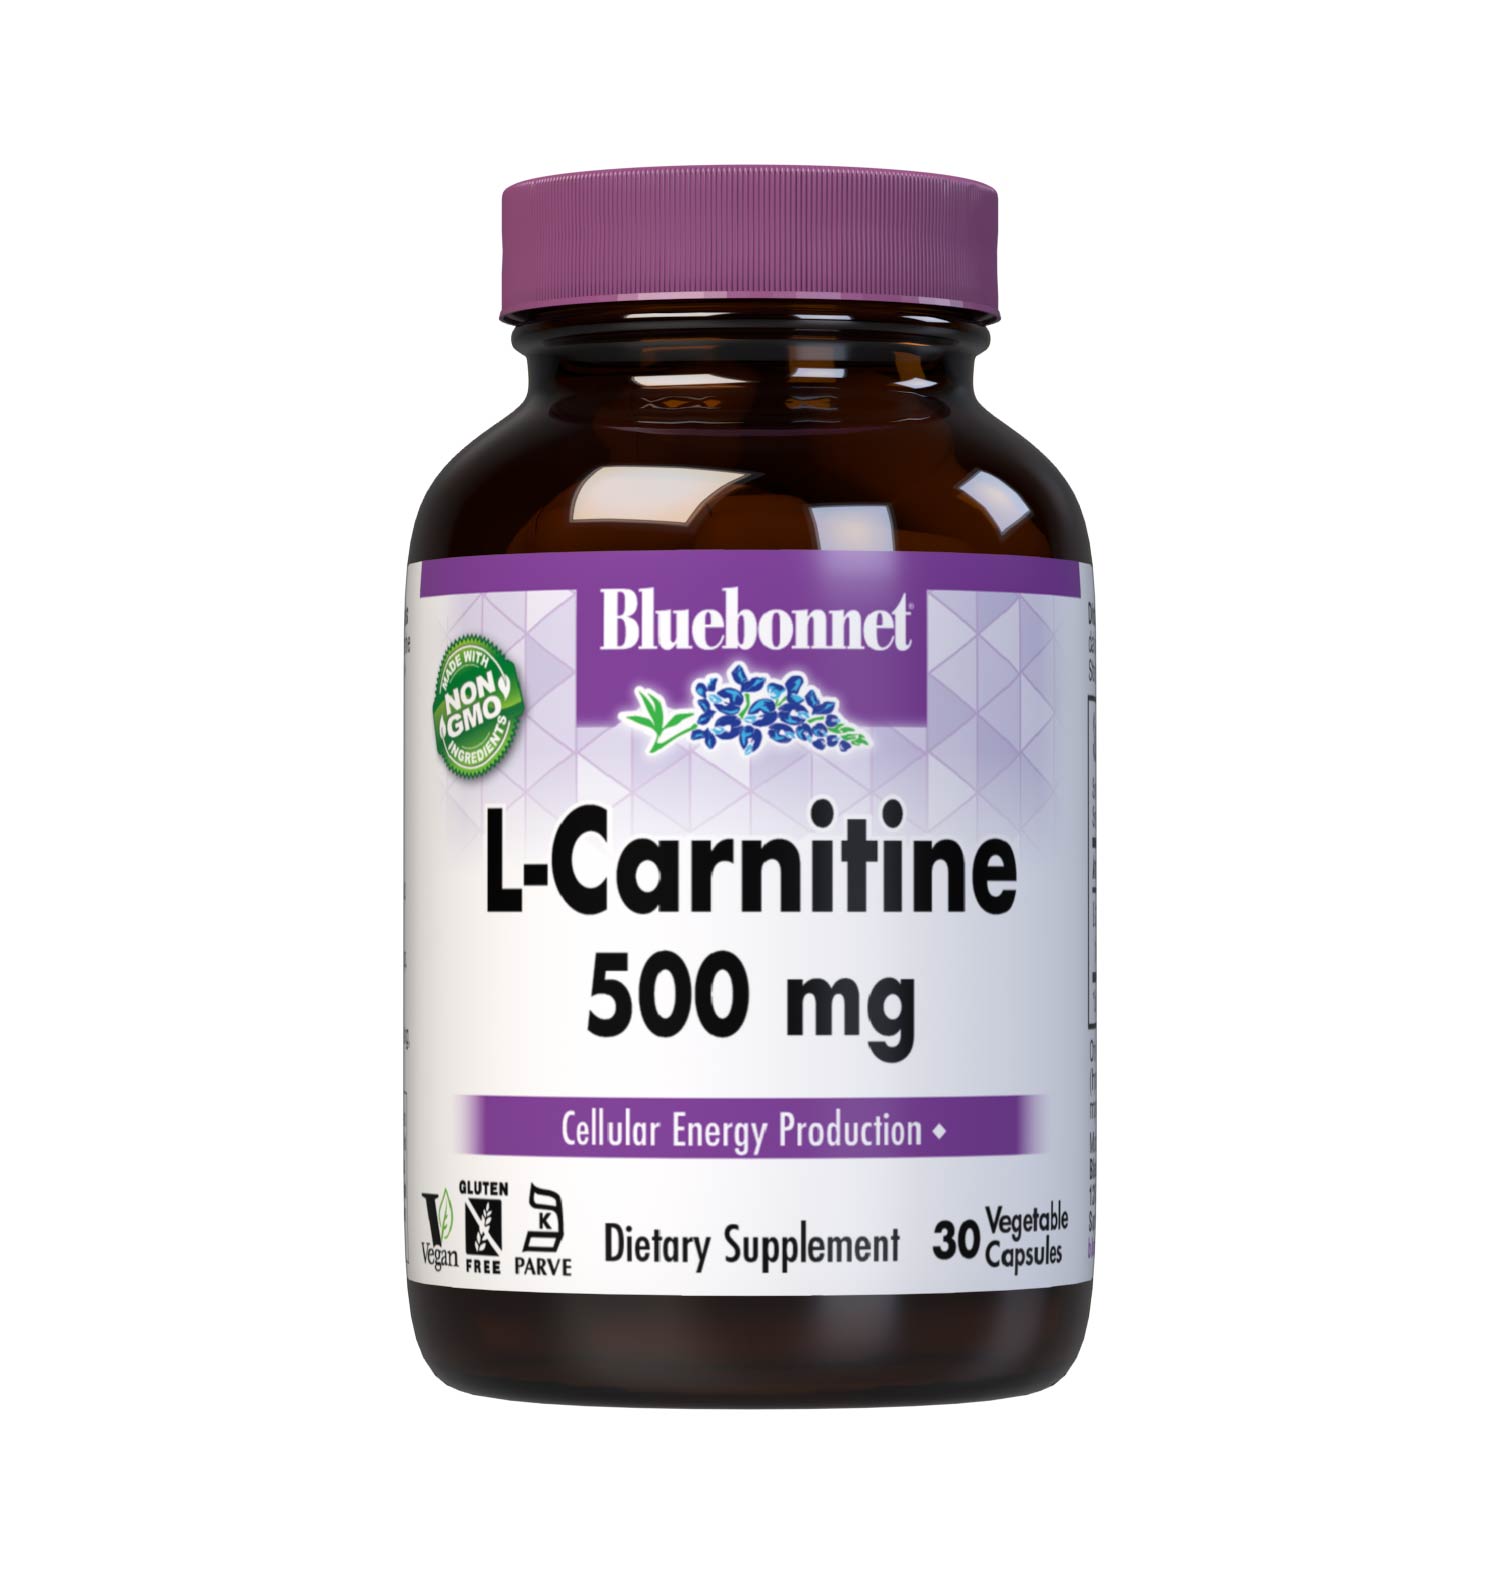 Bluebonnet’s L-Carnitine 500 mg 30 Vegetable Capsules are formulated with the free-form amino acid L-carnitine tartrate in its crystalline form which may support cellular energy. #size_30 count